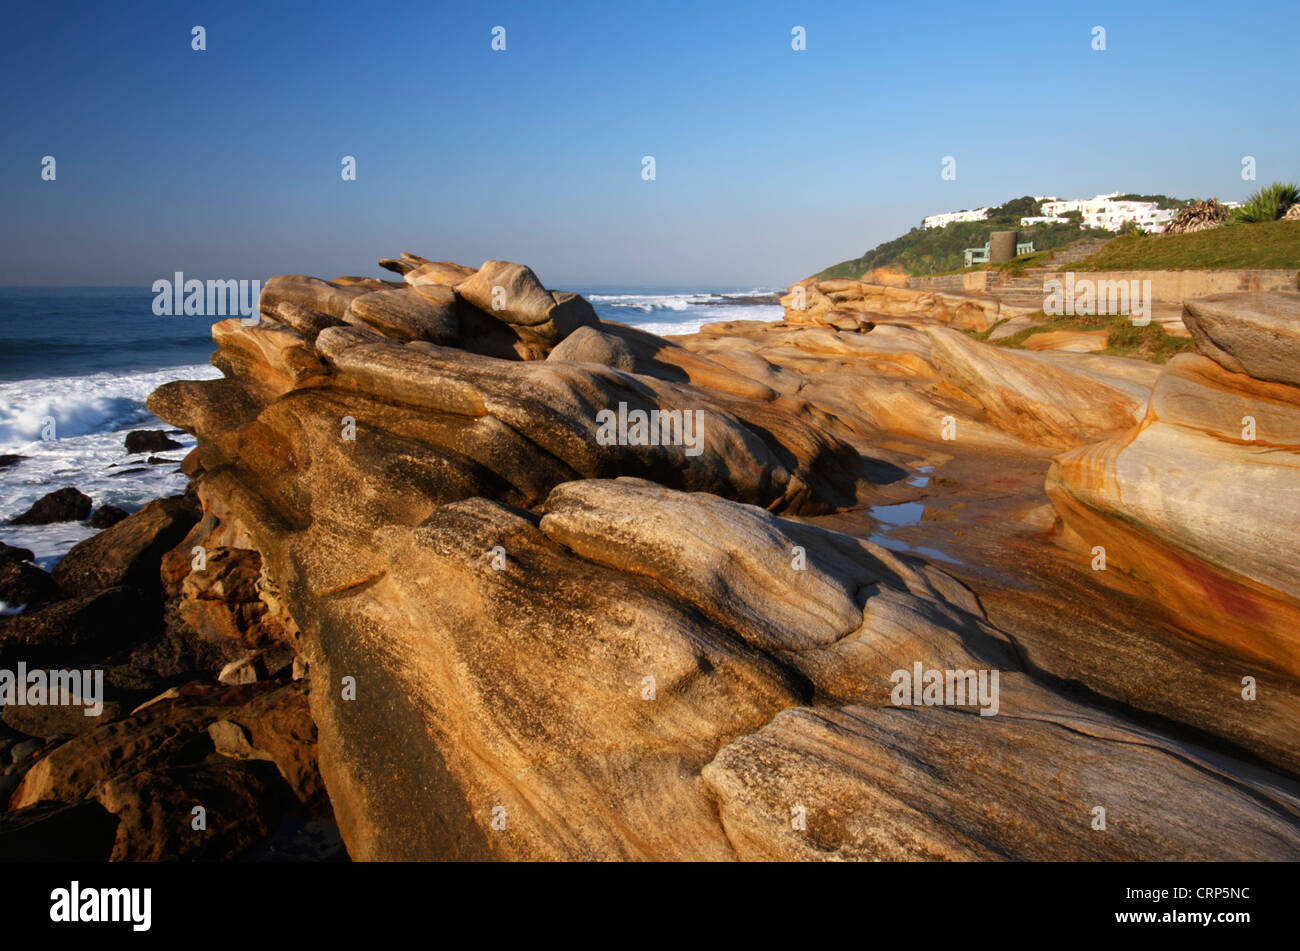 Sandstone cliffs overlooking the sea at Thompson's Bay, Ballito, Kwazulu Natal, South Africa Stock Photo